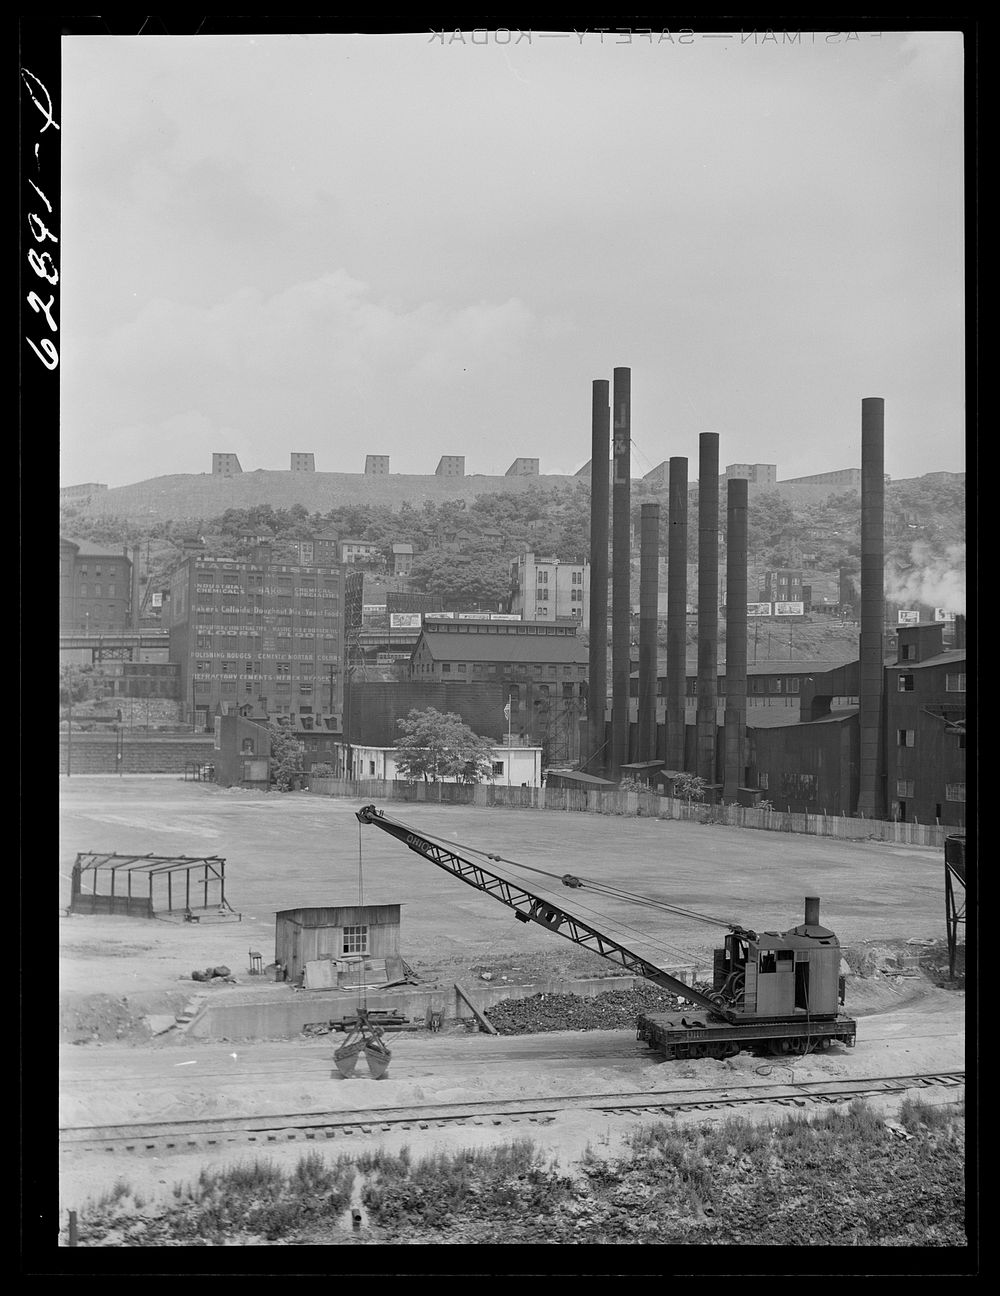 Jones Laughlin steel company. USHA (United States Housing Authority) housing project on top of hill. Pittsburgh…